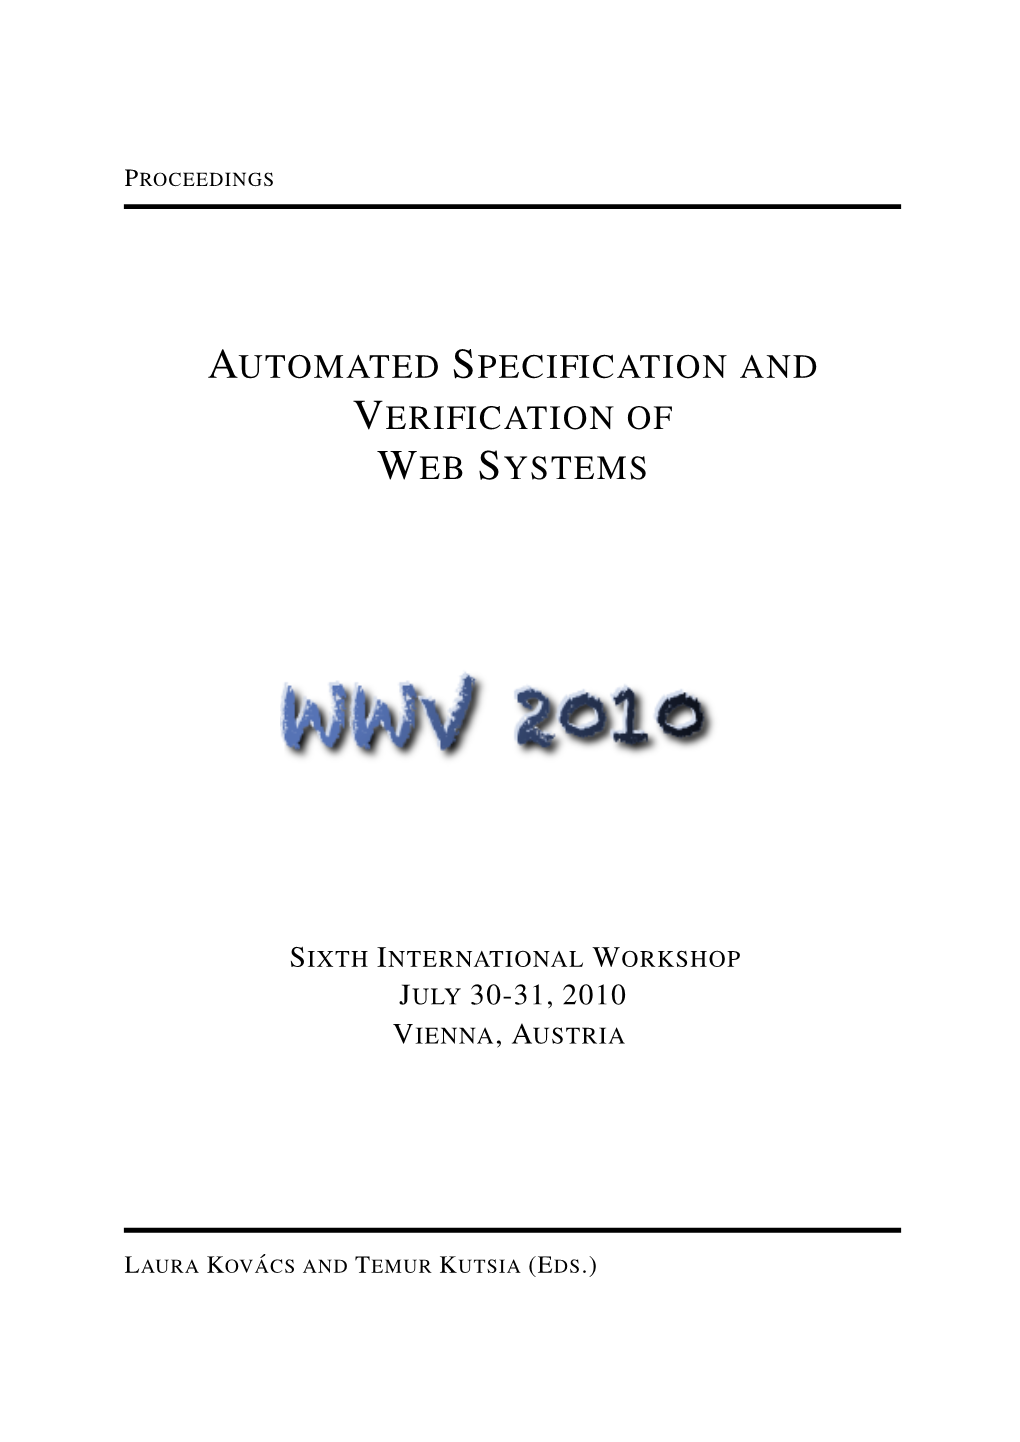 Automated Specification and Verification of Web Systems